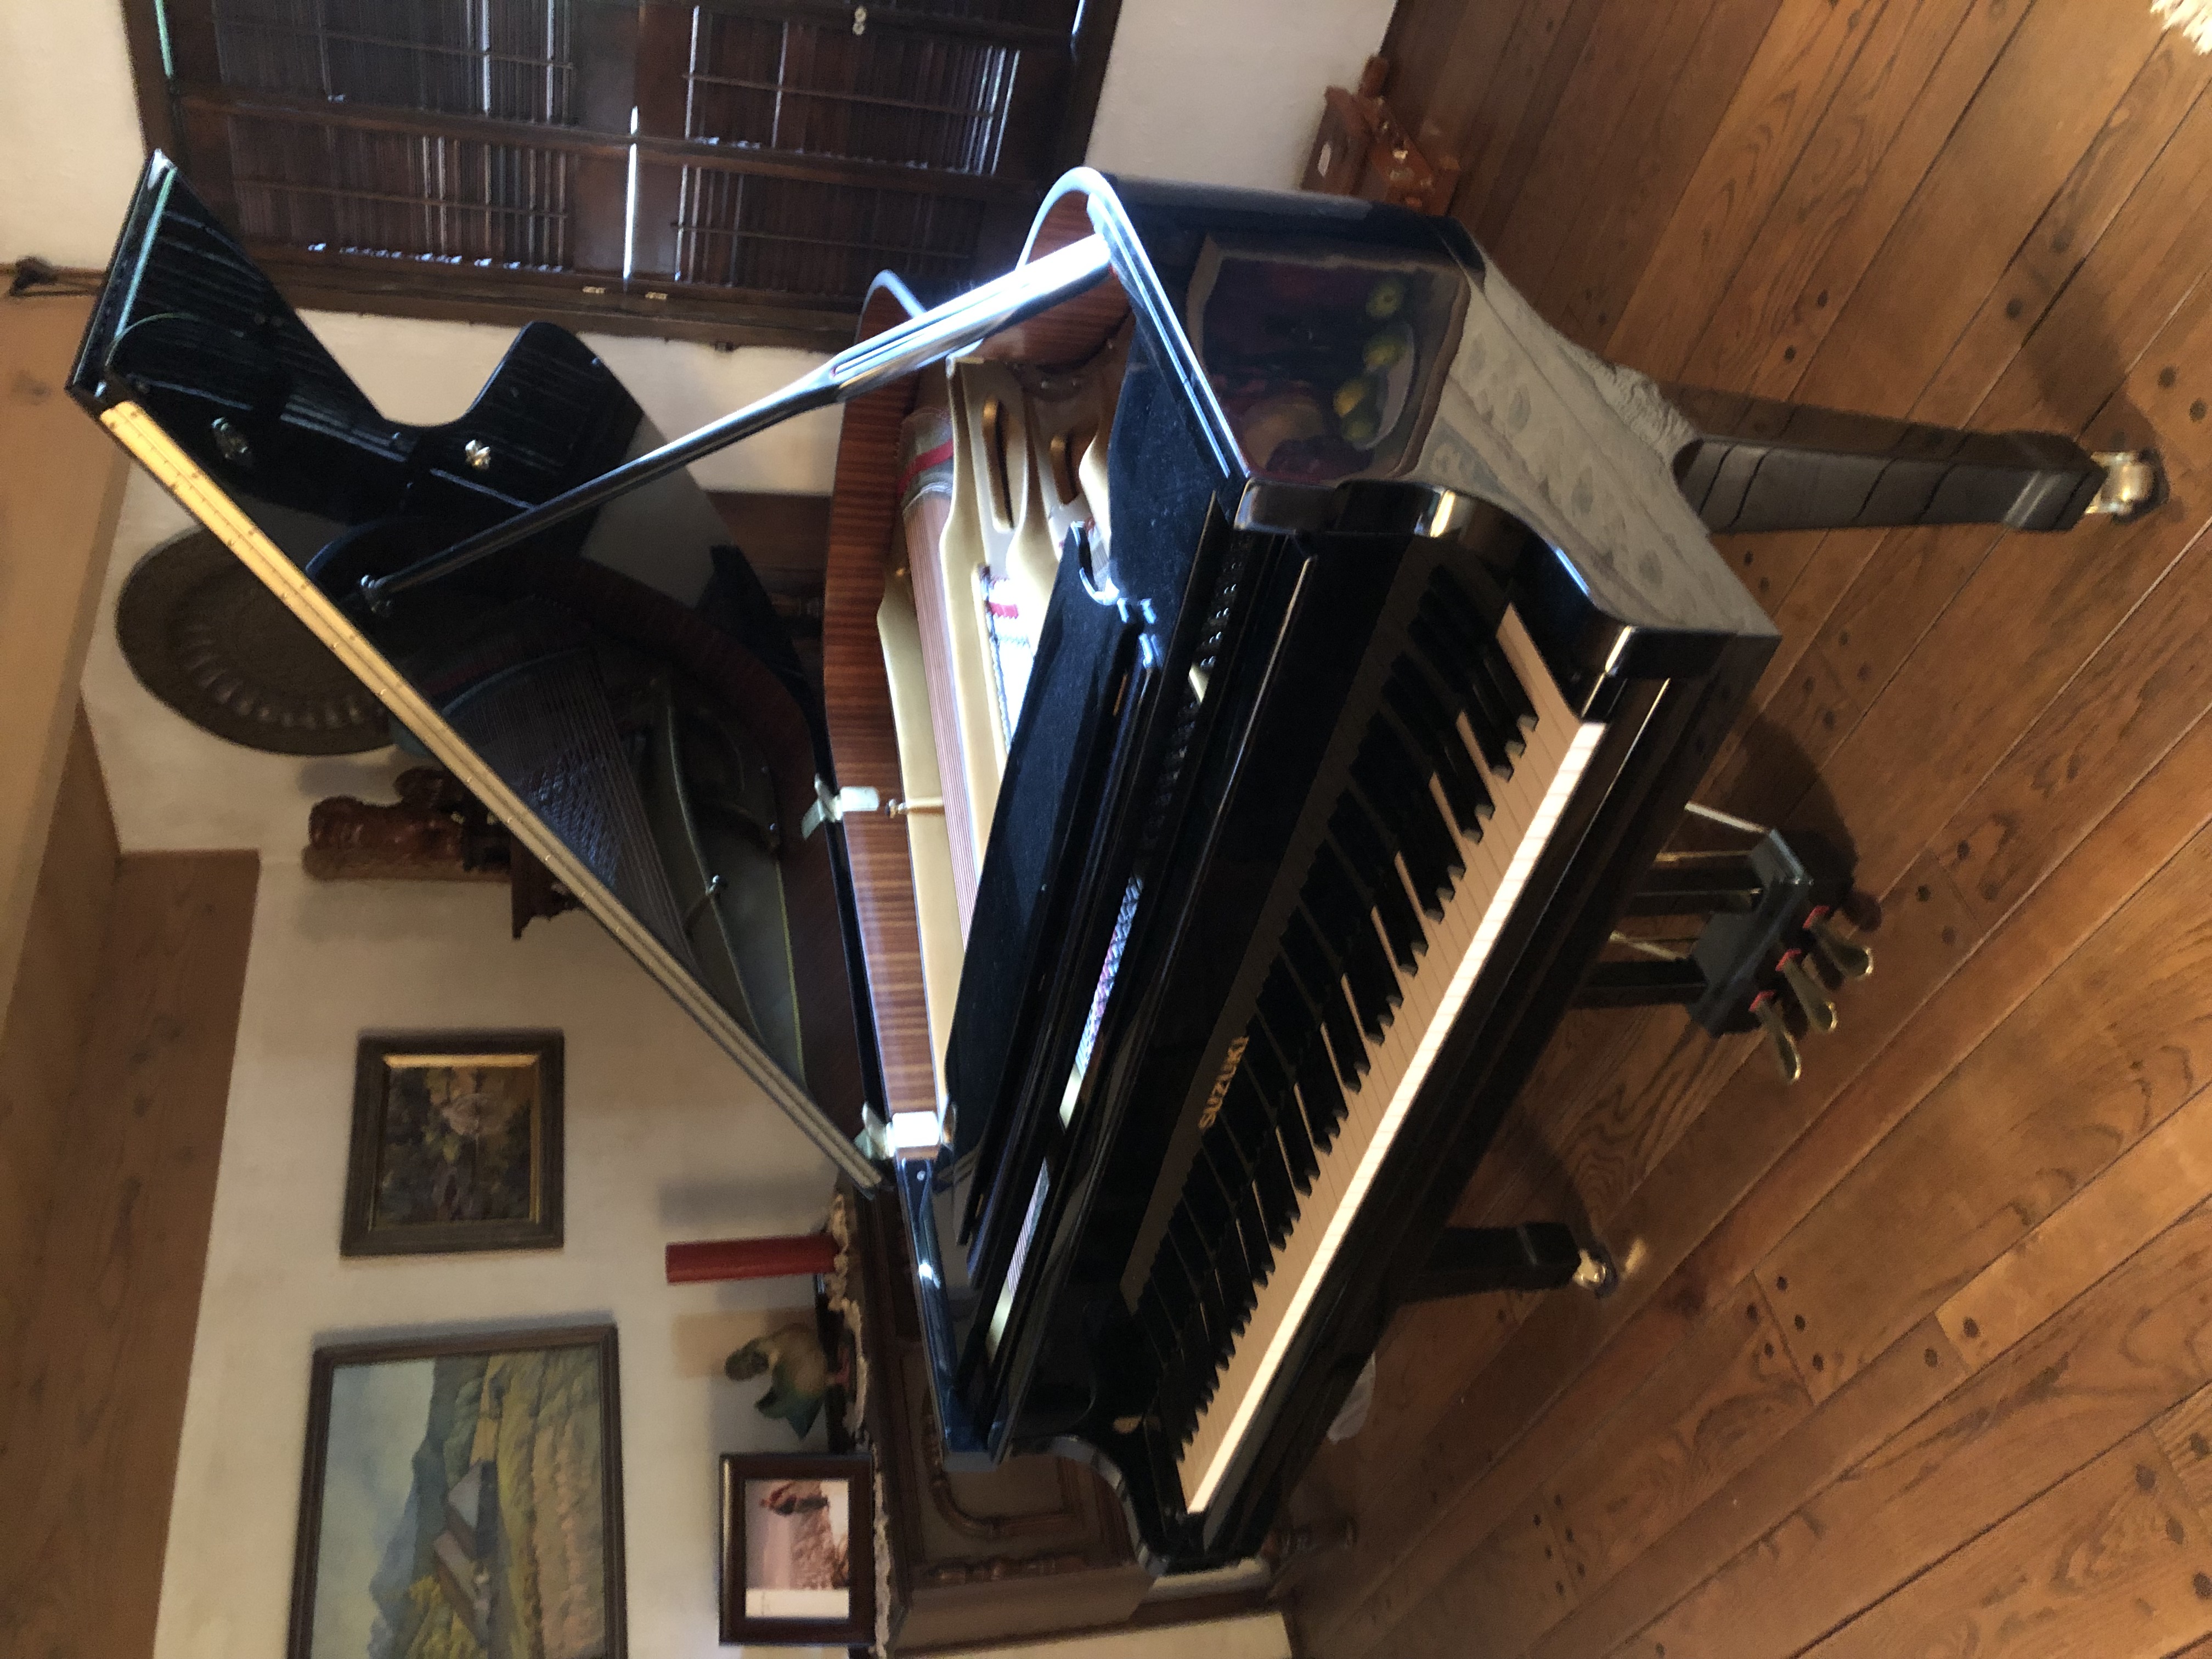 Beautiful Grand Piano, excellent condition